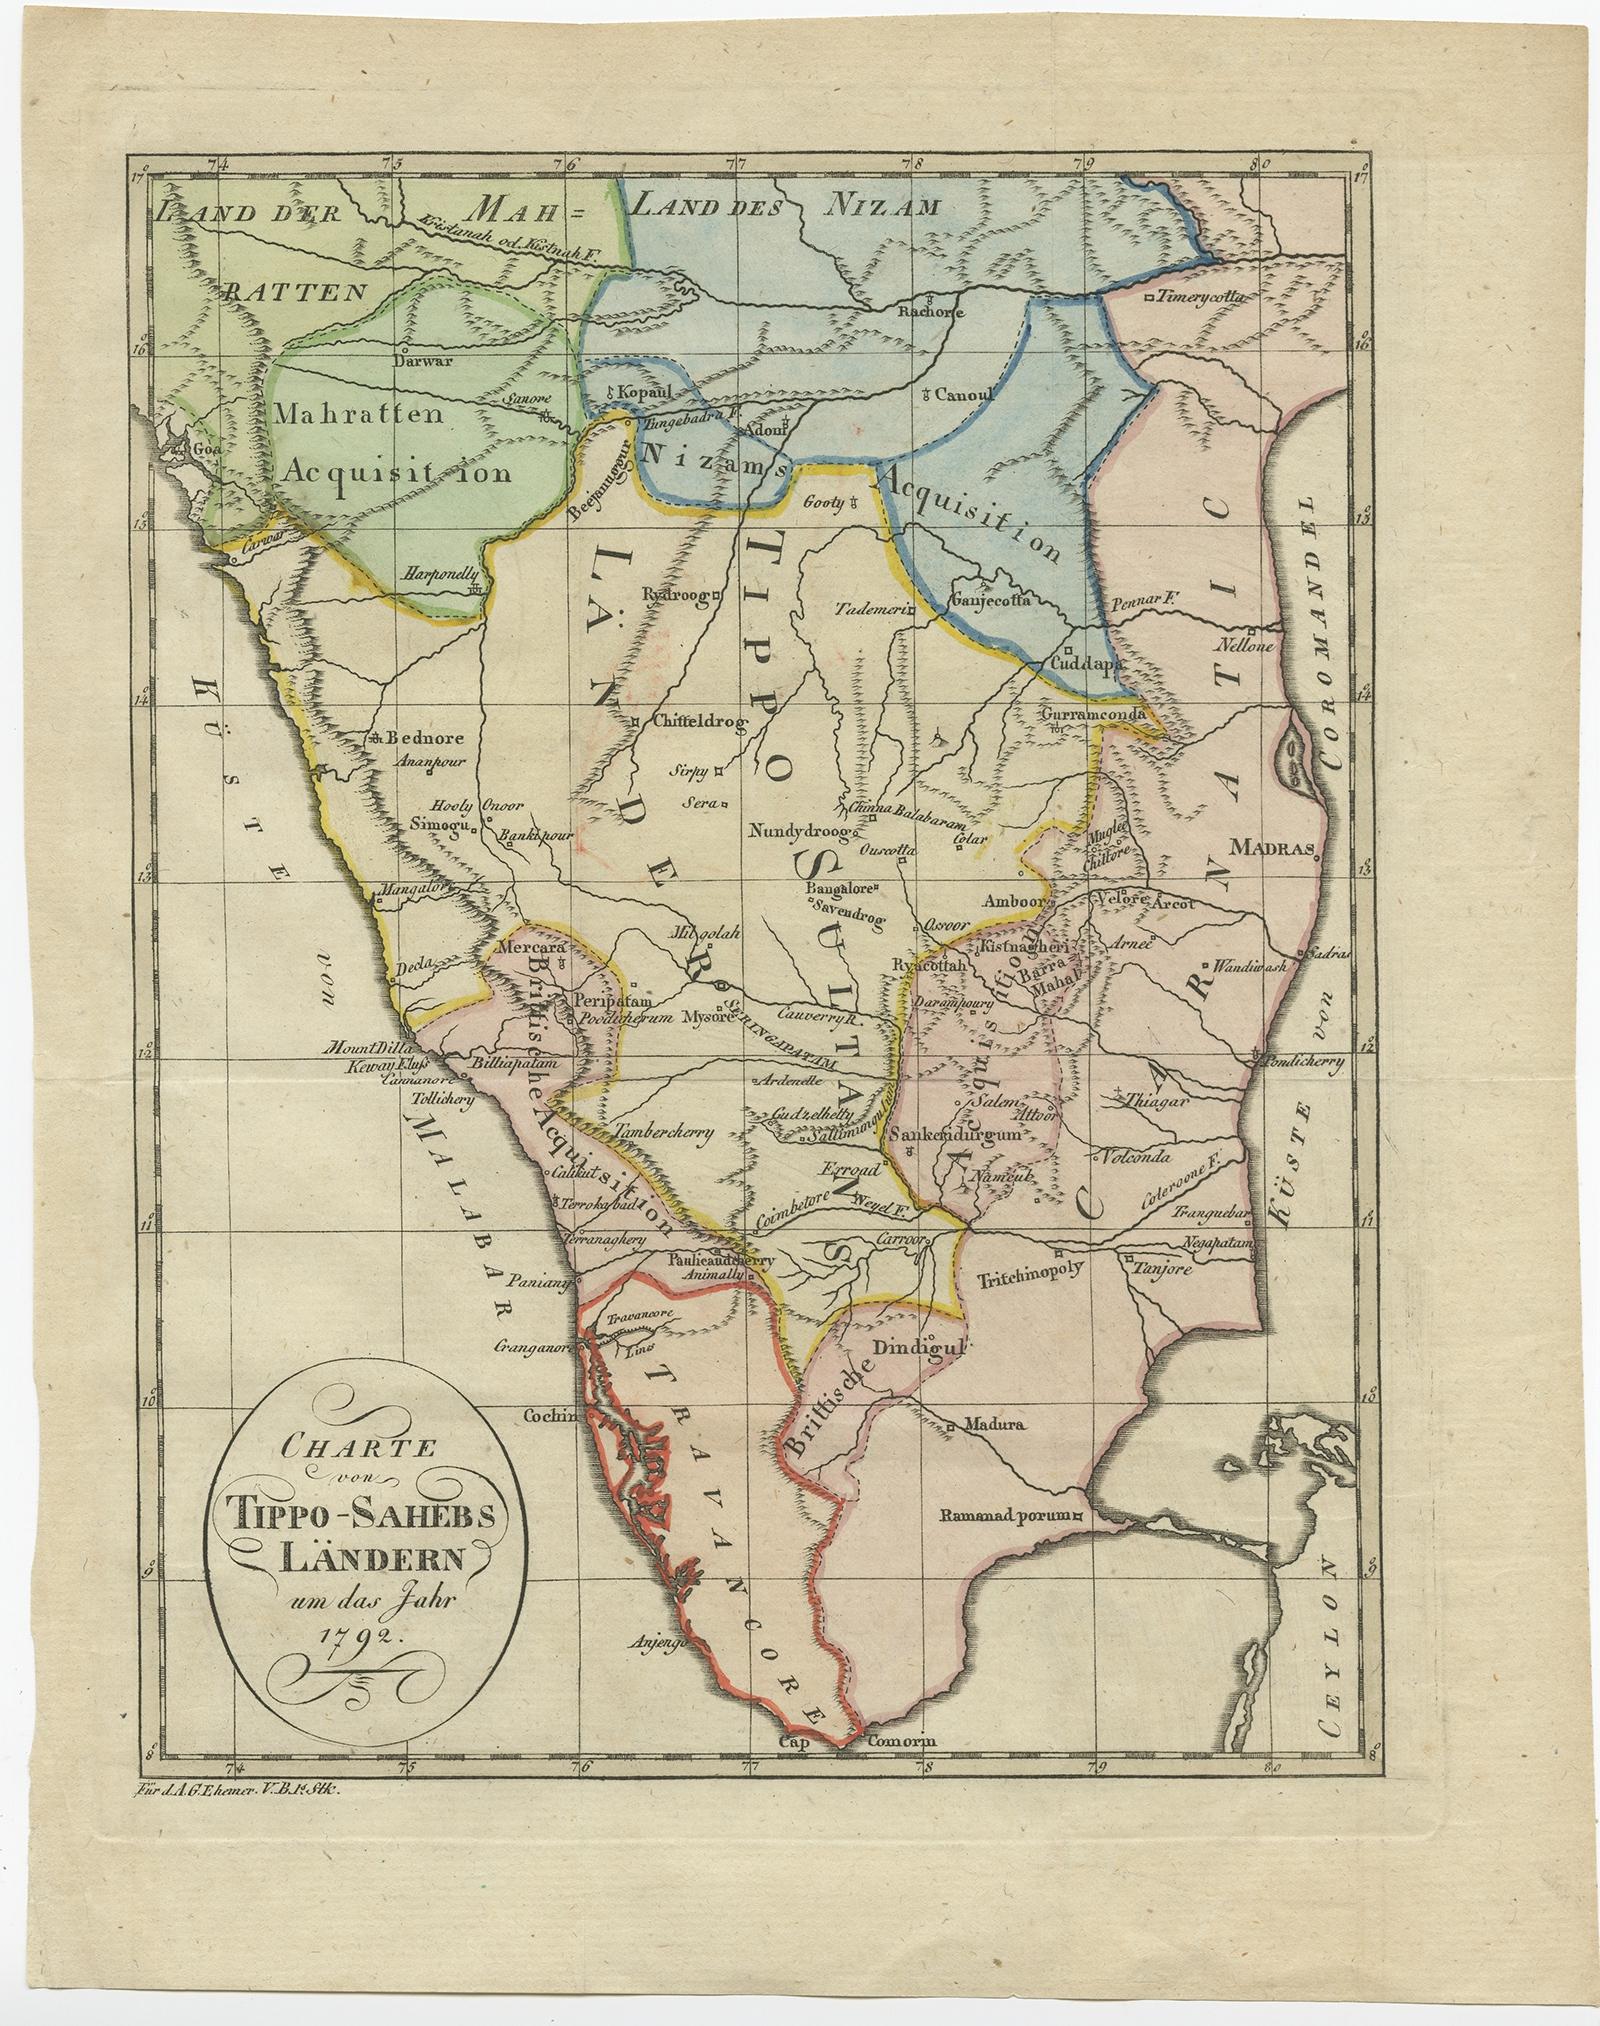 Antique map titled 'Charte von Tippo-Sahebs Ländern um das Jahr 1792'. 

Original antique map of Southern India. Tipu Sultan, also known as the Tipu Sahib, was a ruler of the Kingdom of Mysore. This map originates from volume 5 of 'Allgemeine